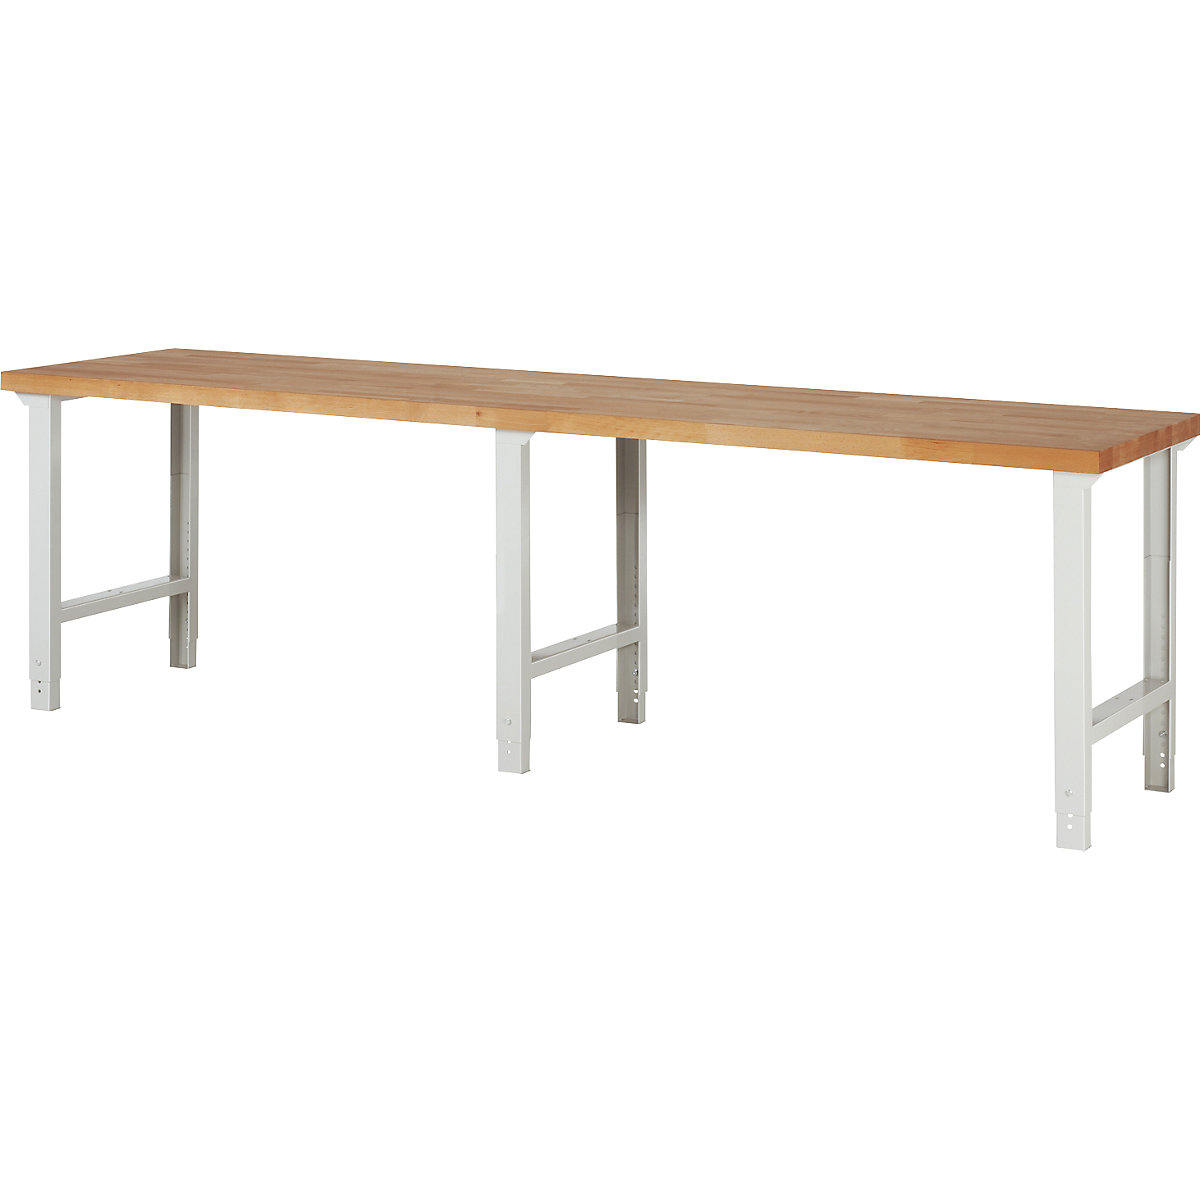 Workbench, Series 7 modular system – eurokraft pro, without substructure, extra wide, WxD 3000 x 700 mm-2